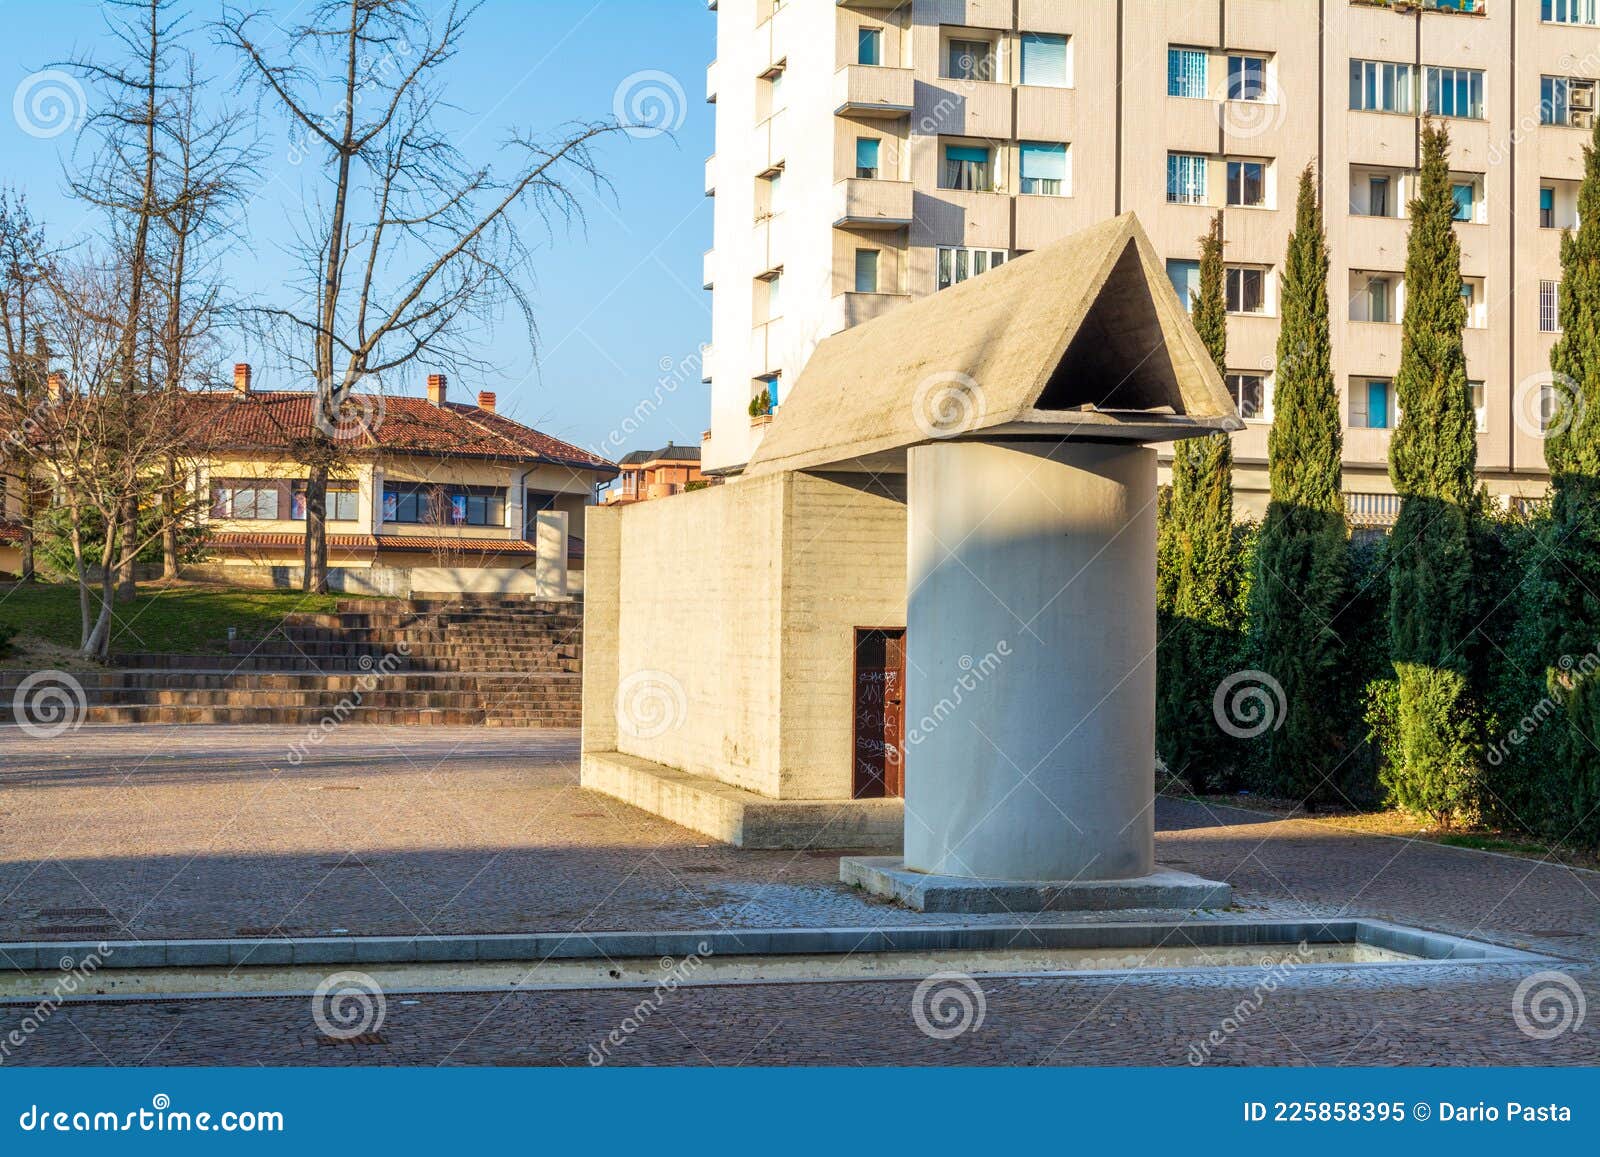 Converge Moske deform Segrate, Milan, Italy - the Monument To the Partisans Designed by Aldo Rossi  Architect Stock Image - Image of building, historical: 225858395